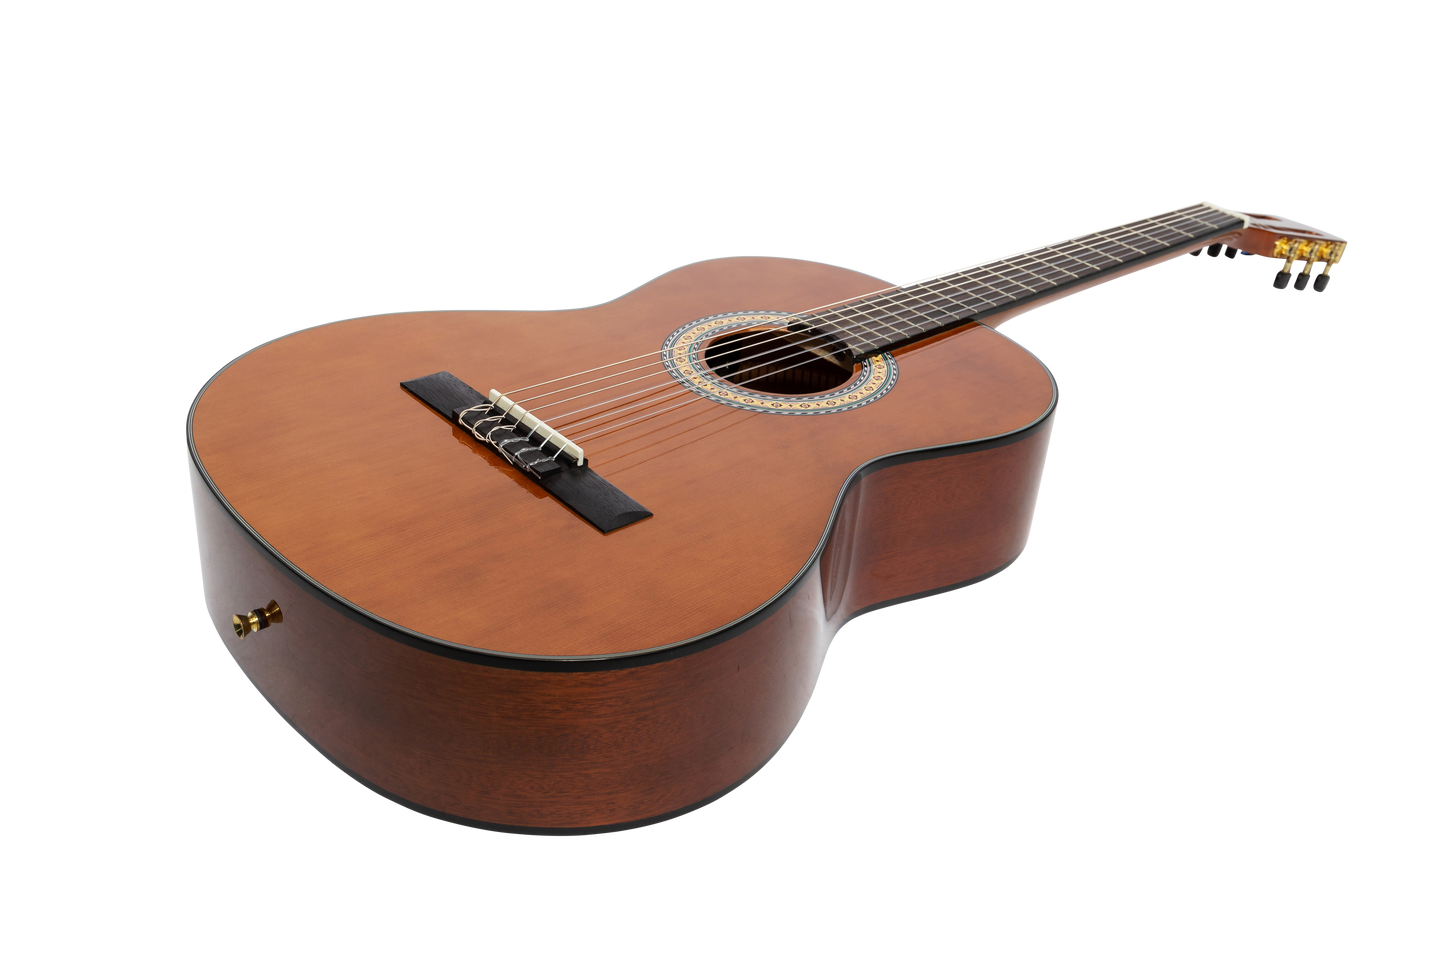 Martinez 'Slim Jim' G-Series Full Size Classical Guitar with Built-in Tuner (Natural-Gloss)